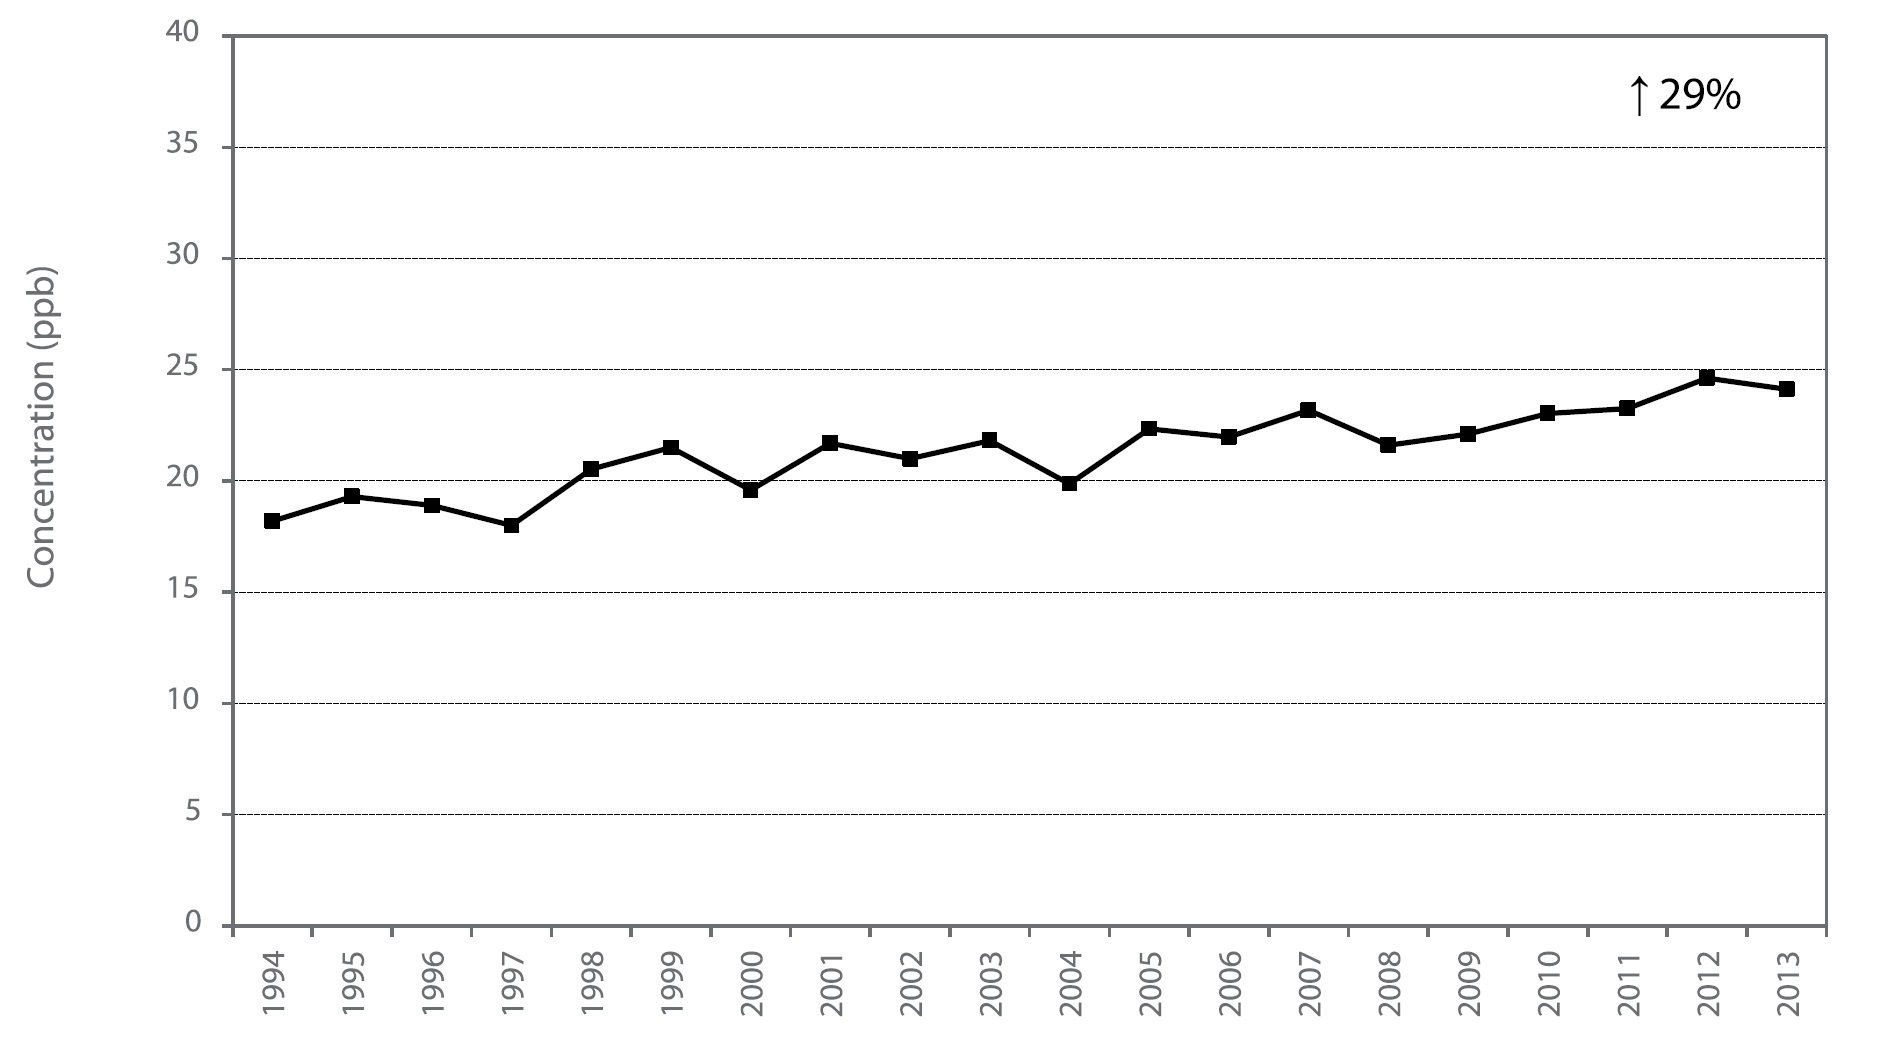 Figure A14 is a line chart displaying the ozone annual mean at Toronto East from 1994 to 2013. Over this 20-year period, ozone increased 29%.